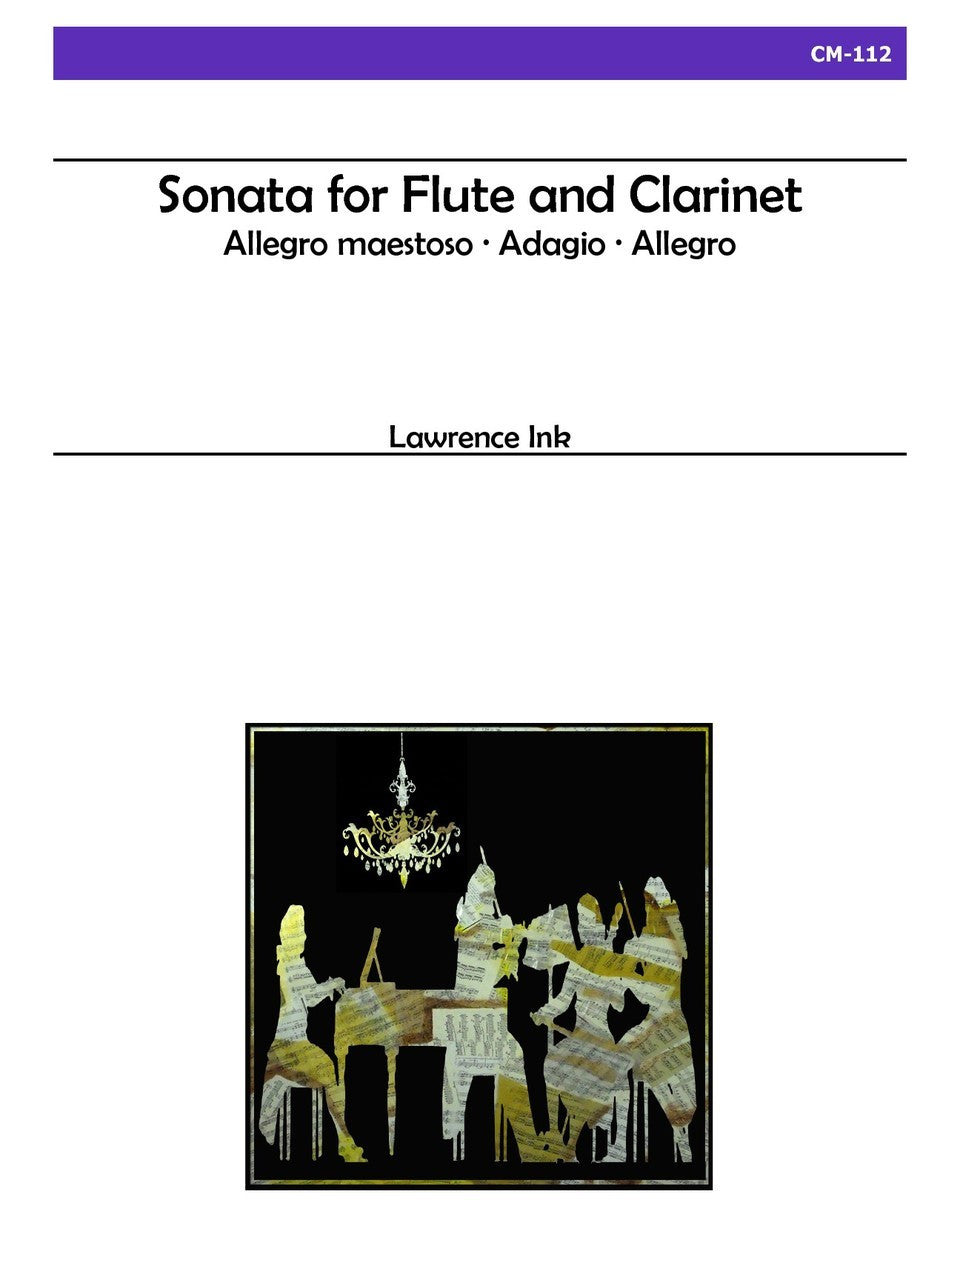 Ink - Sonata for Flute and Clarinet